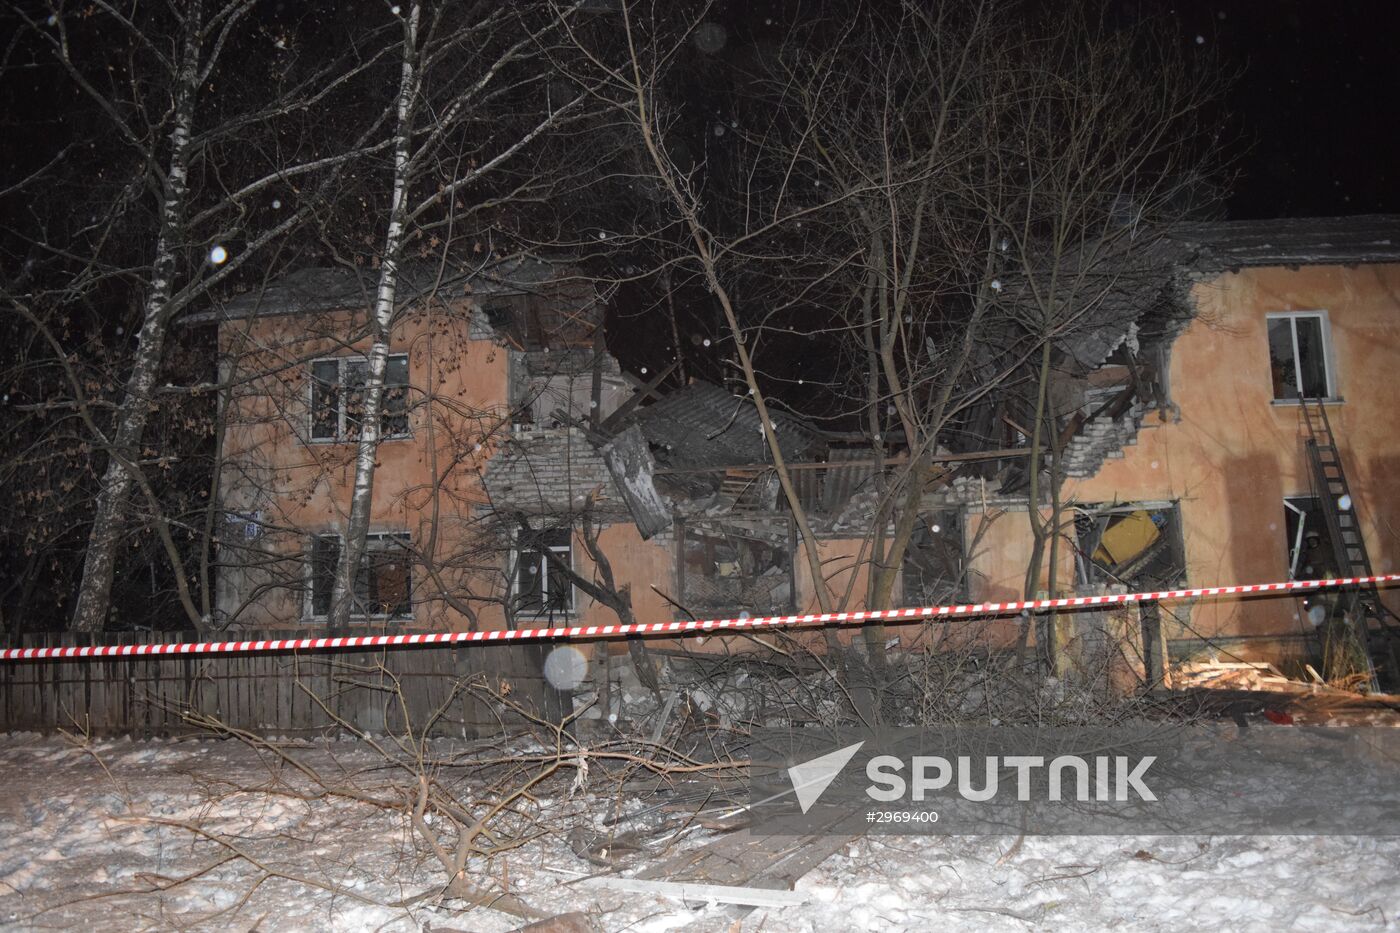 Consequences of gas explosion in residential house in Ivanovo